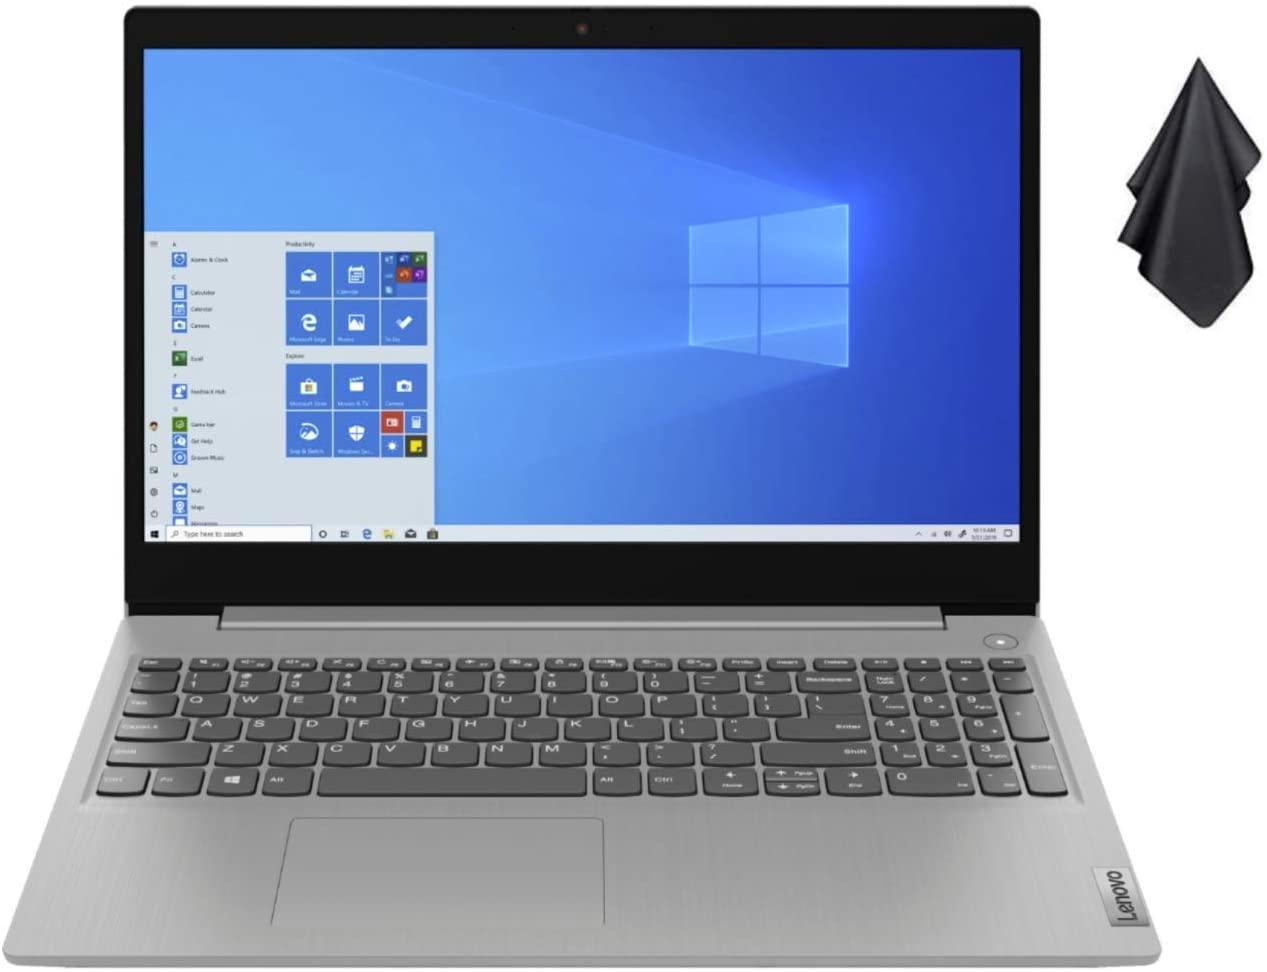 Lenovo IdeaPad 3 15.6in i5 12GB 512GB Touchscreen Laptop for $509.98 Shipped